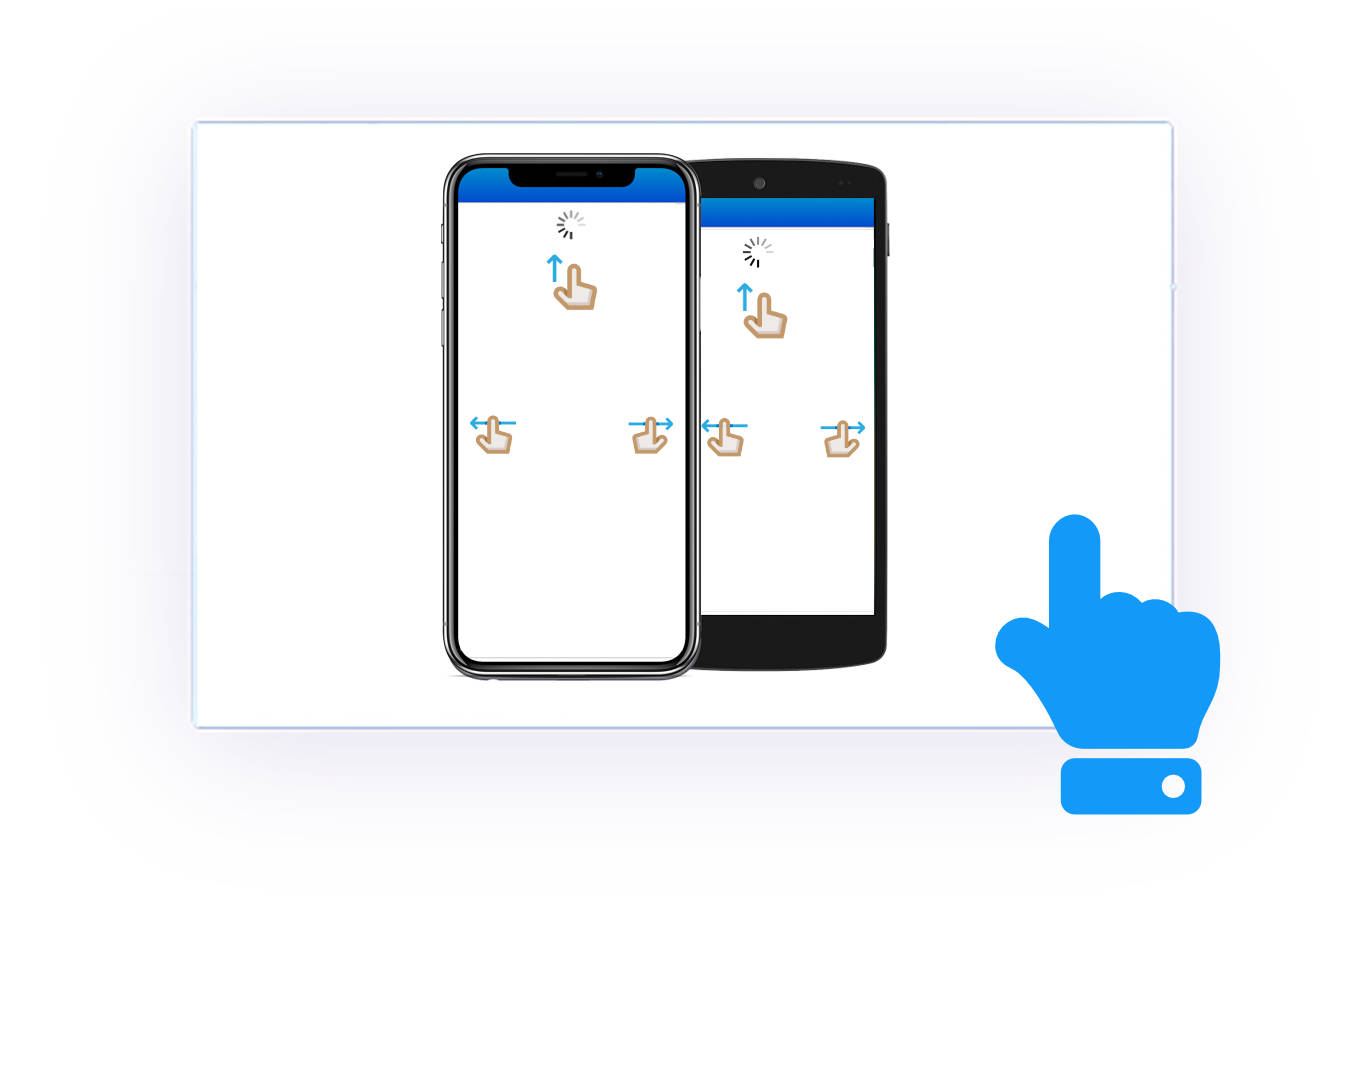 WebView navigation with gestures is very user-friendly